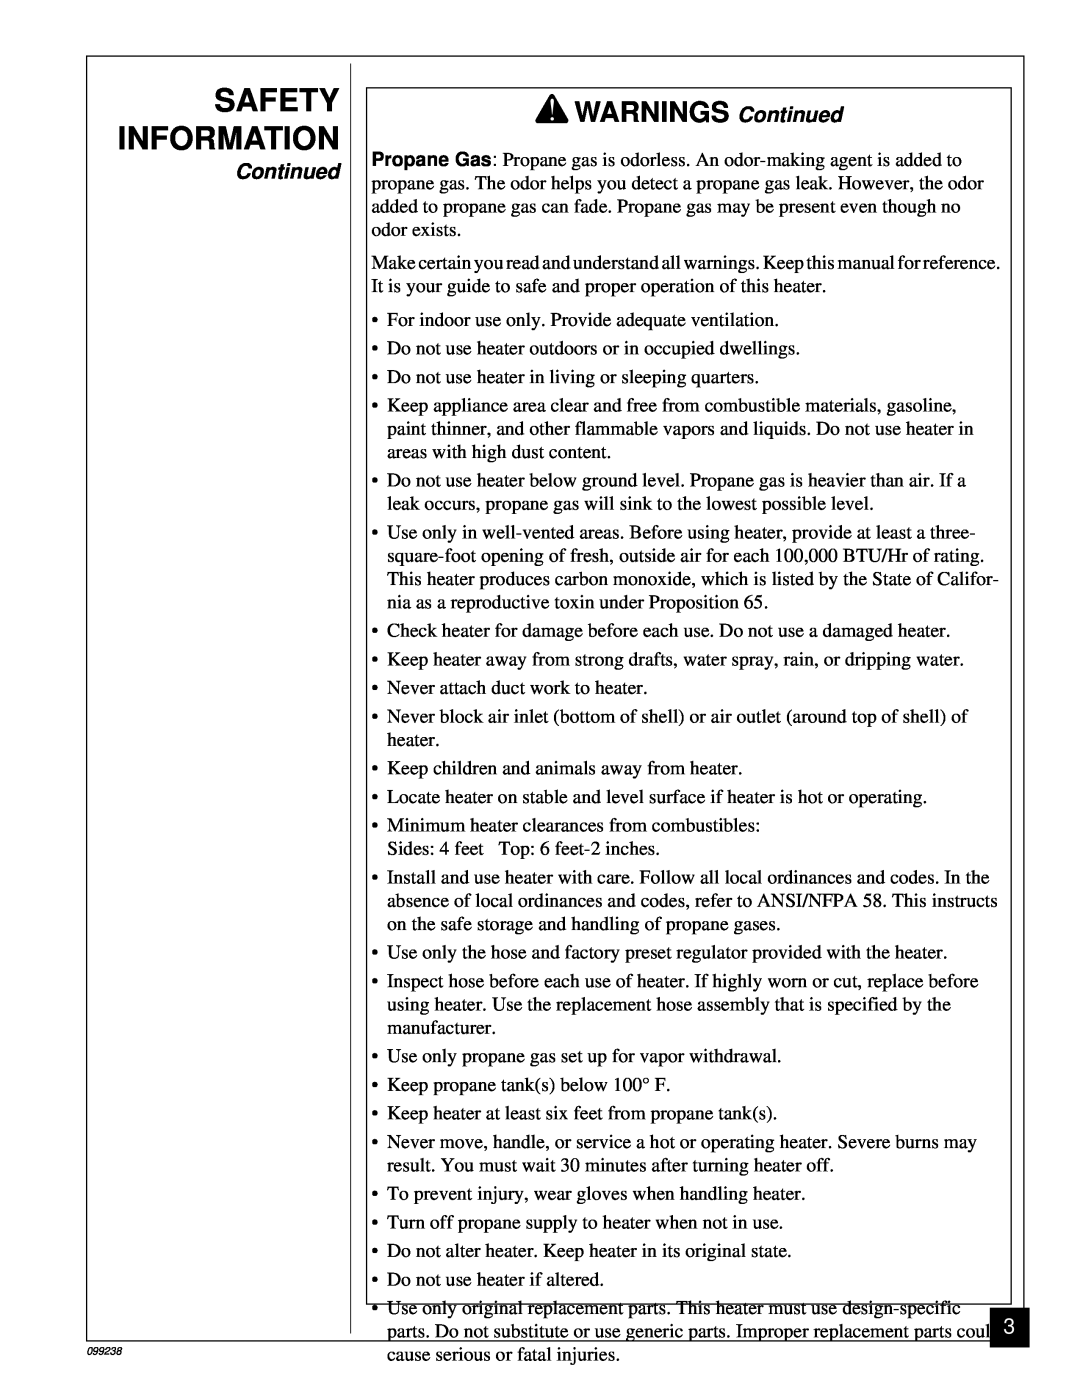 Homelite HP275 owner manual Information, WARNINGS Continued, Safety 